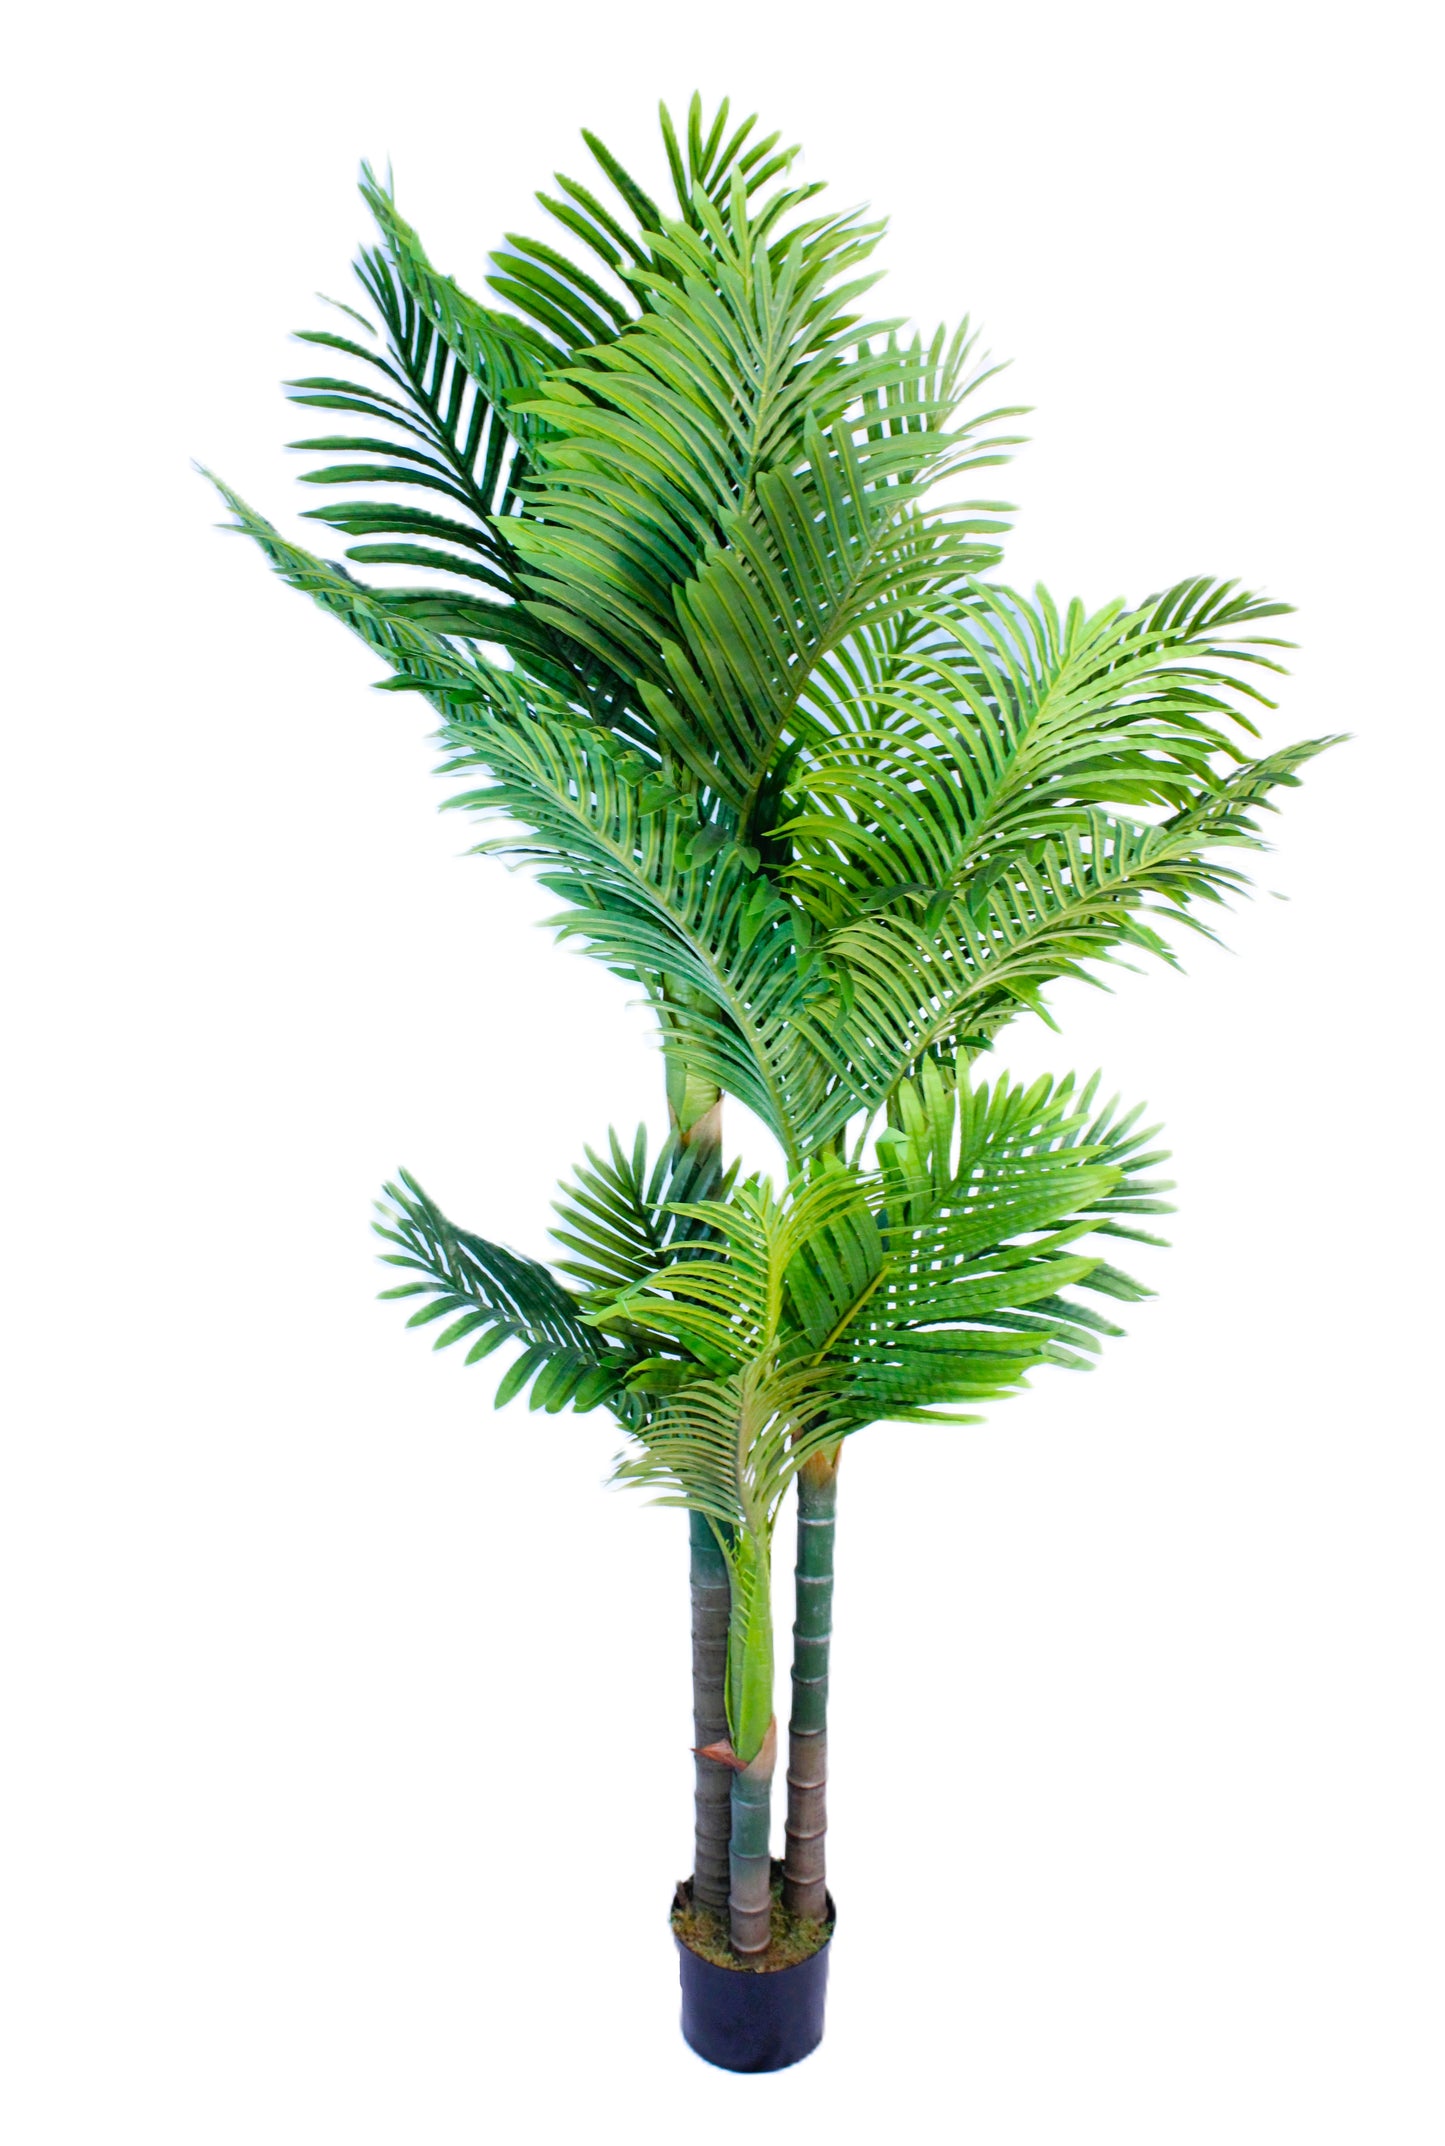 Artificial Golden Cane Palm Tree (6 Feet High) UV Protection